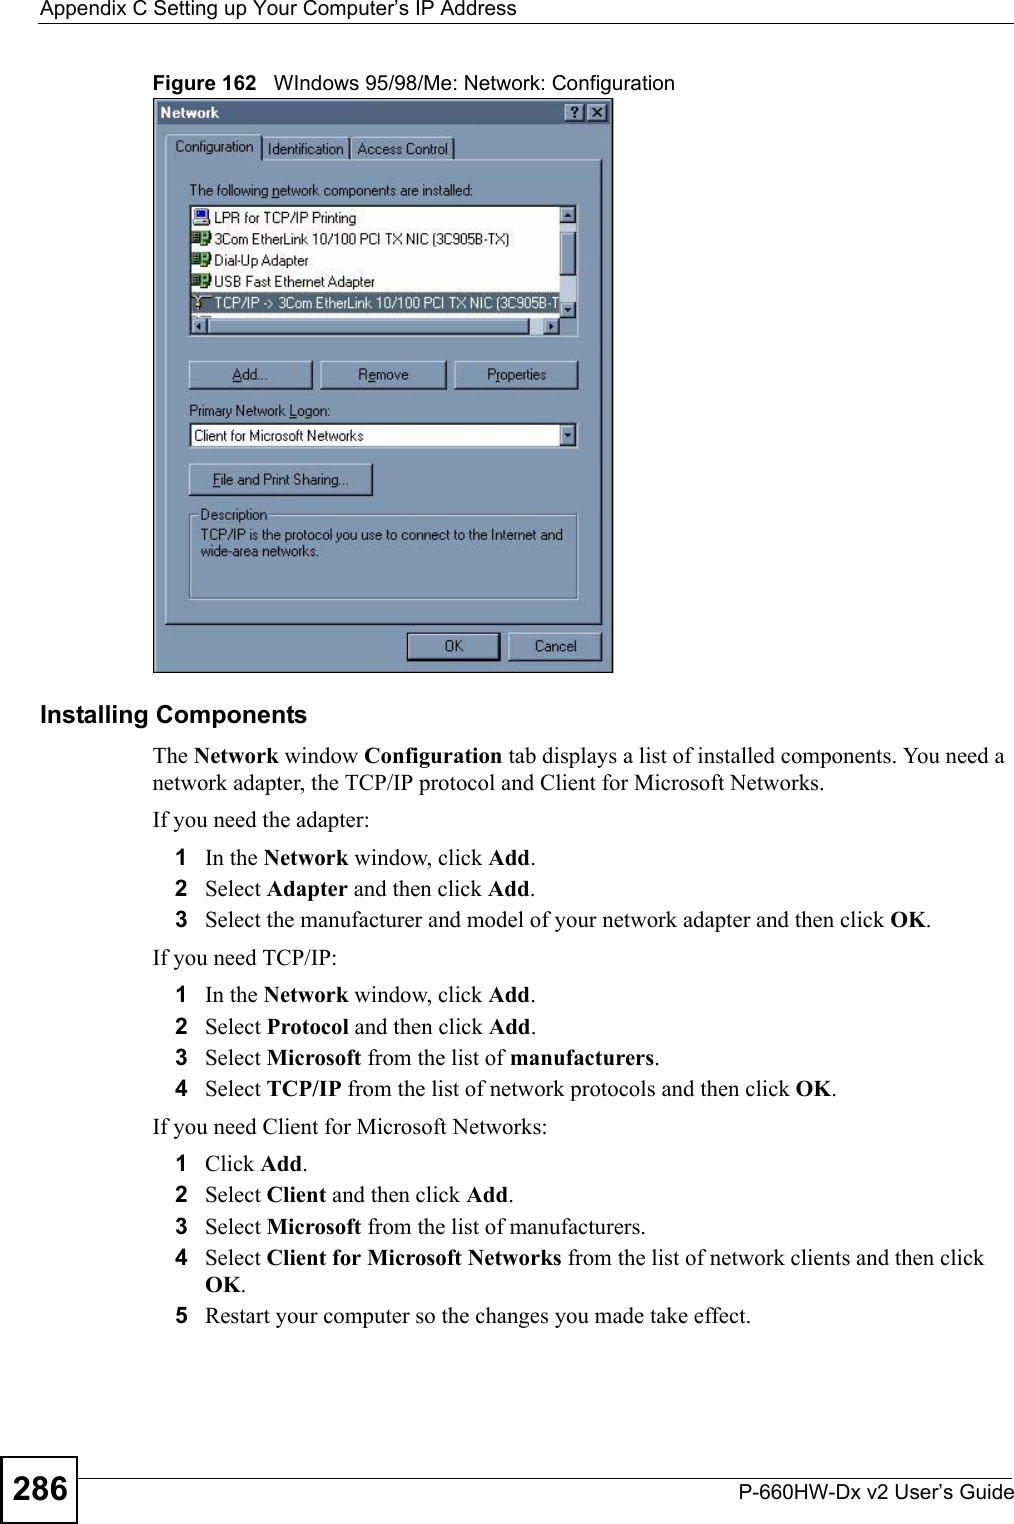 Appendix C Setting up Your Computer’s IP AddressP-660HW-Dx v2 User’s Guide286Figure 162   WIndows 95/98/Me: Network: ConfigurationInstalling ComponentsThe Network window Configuration tab displays a list of installed components. You need a network adapter, the TCP/IP protocol and Client for Microsoft Networks.If you need the adapter:1In the Network window, click Add.2Select Adapter and then click Add.3Select the manufacturer and model of your network adapter and then click OK.If you need TCP/IP:1In the Network window, click Add.2Select Protocol and then click Add.3Select Microsoft from the list of manufacturers.4Select TCP/IP from the list of network protocols and then click OK.If you need Client for Microsoft Networks:1Click Add.2Select Client and then click Add.3Select Microsoft from the list of manufacturers.4Select Client for Microsoft Networks from the list of network clients and then click OK.5Restart your computer so the changes you made take effect.